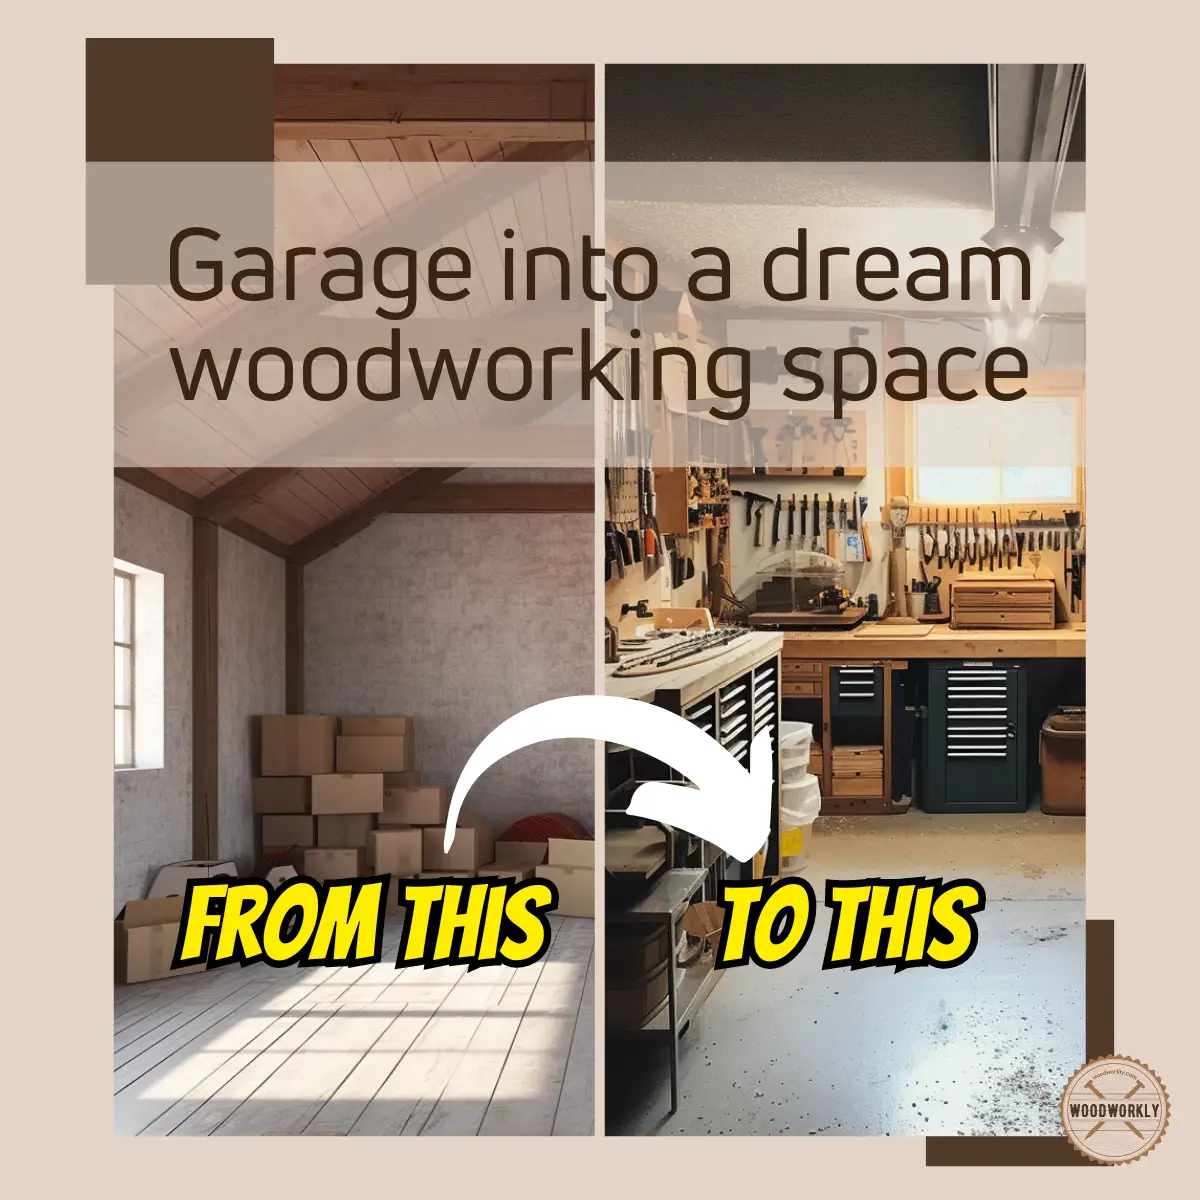 Garage into a woodworking space